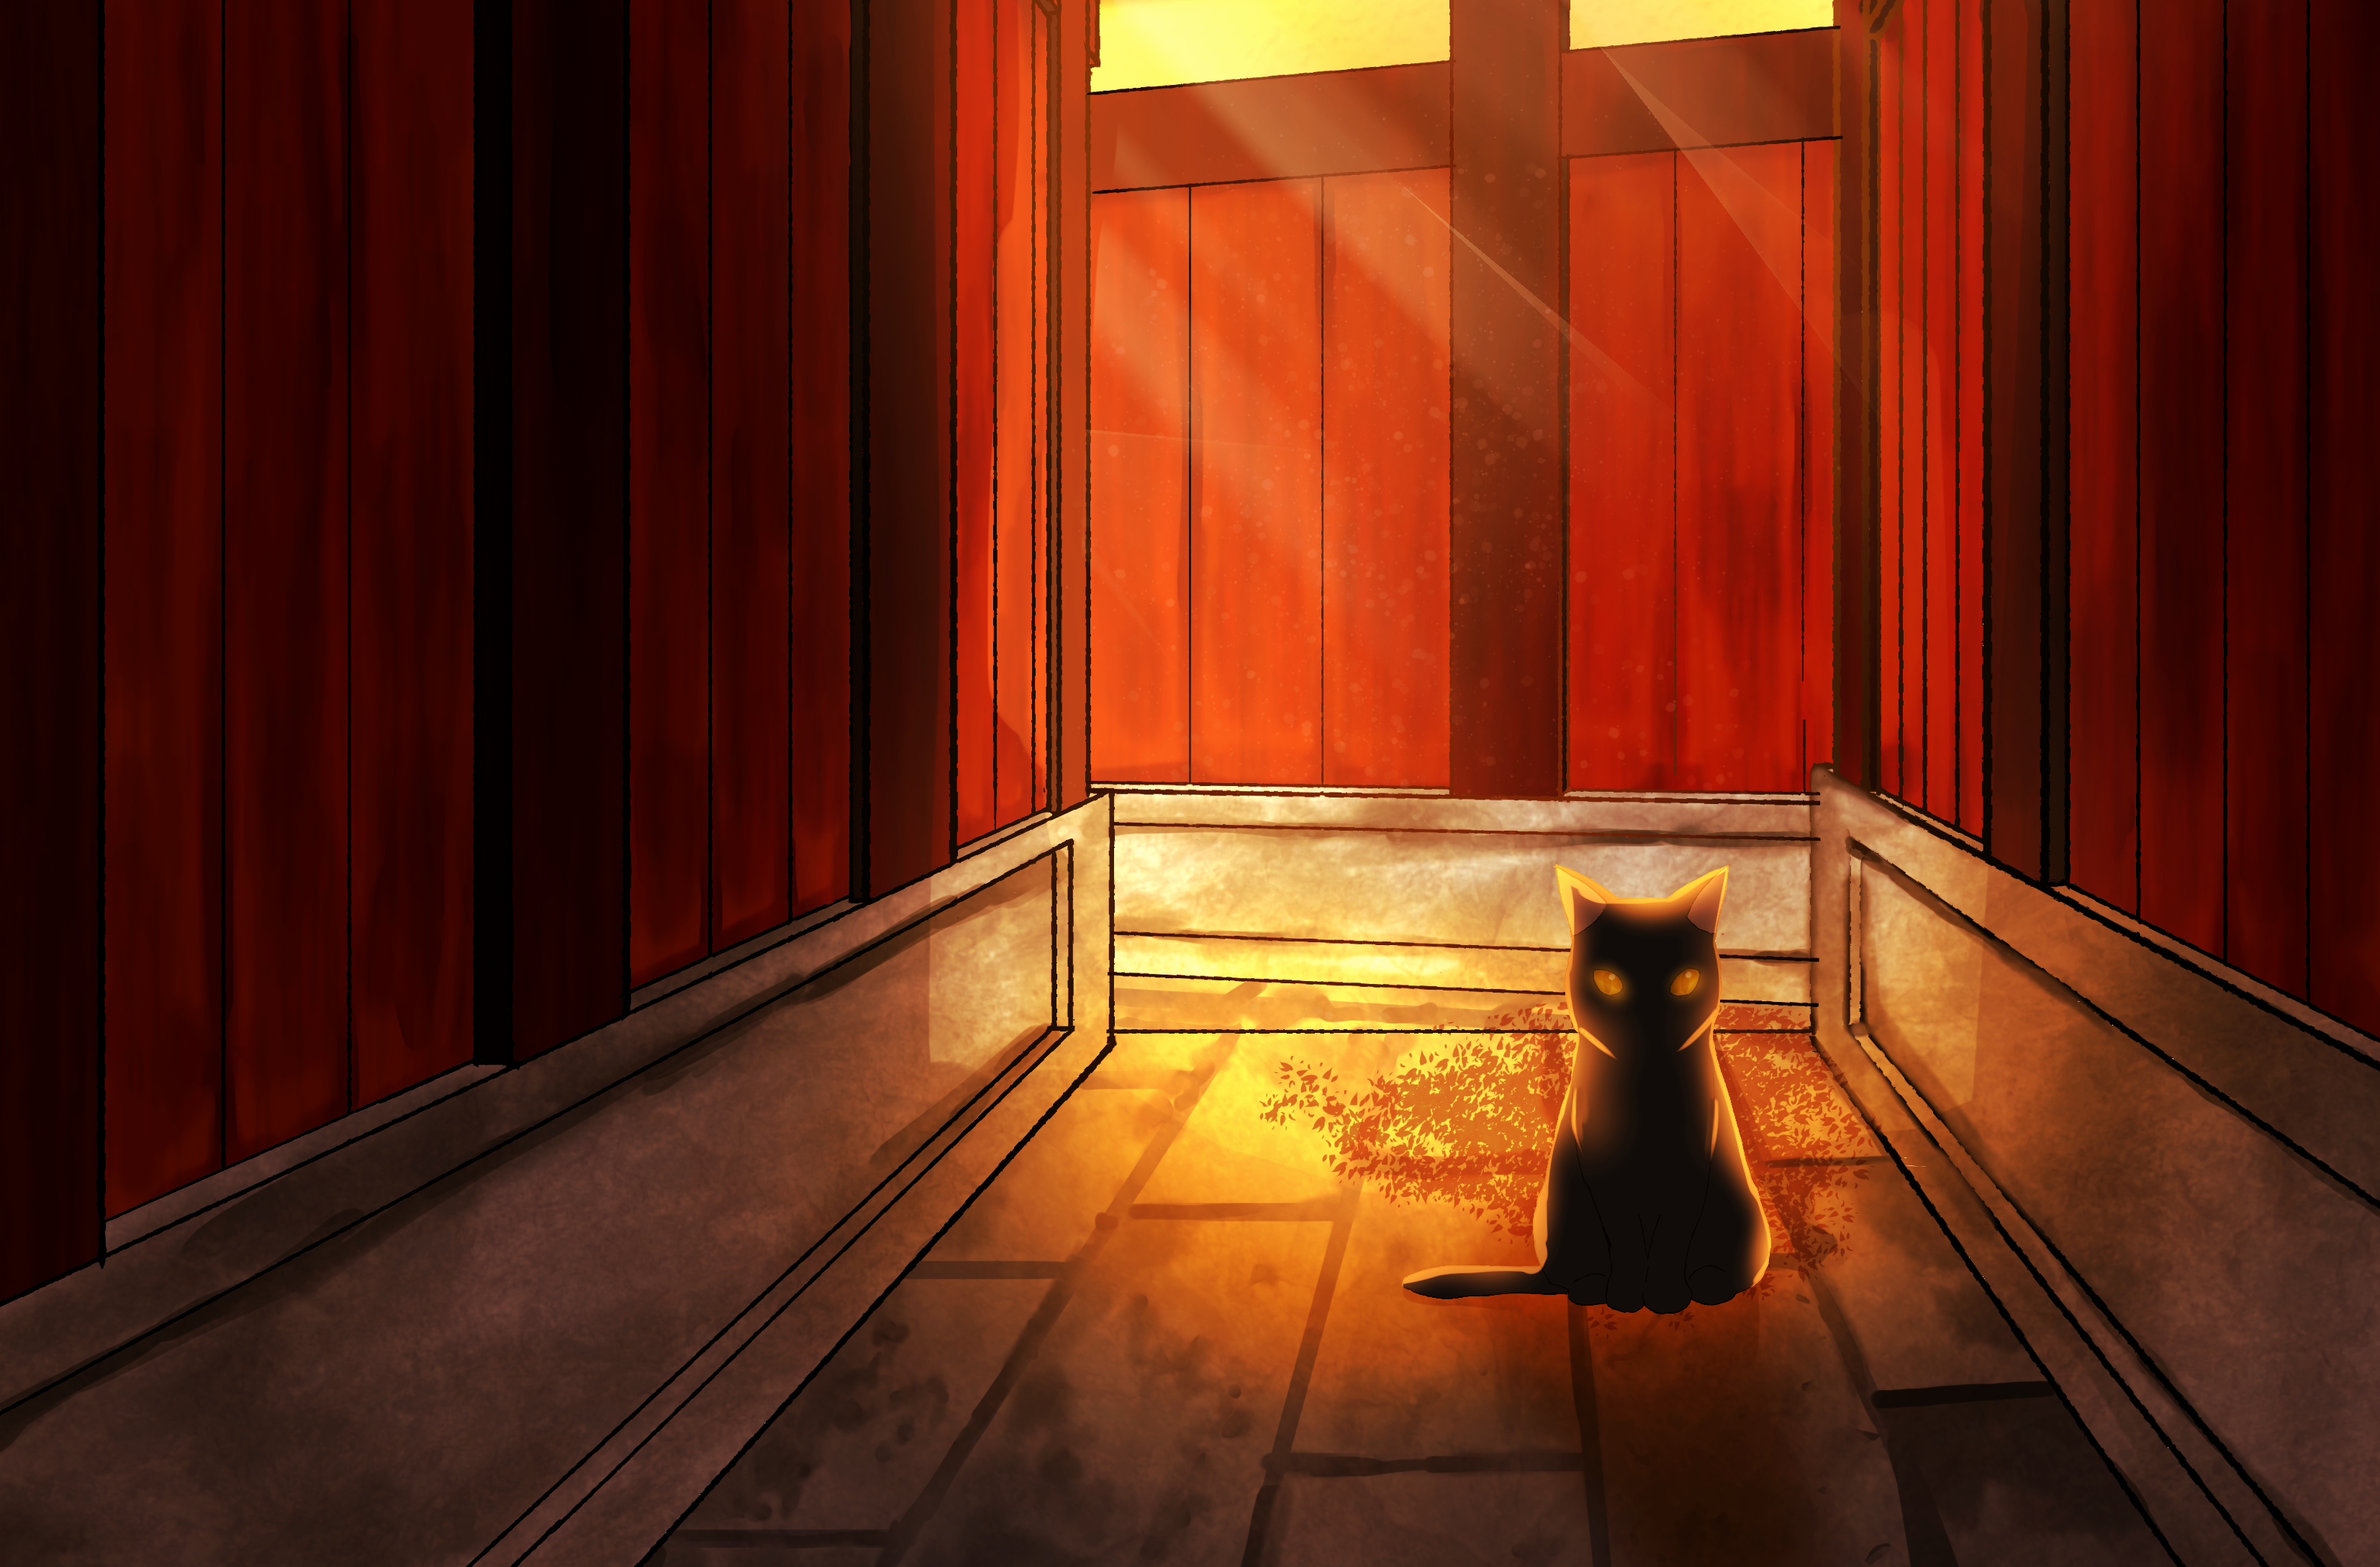 Anime Cat HD Wallpaper | Background Image